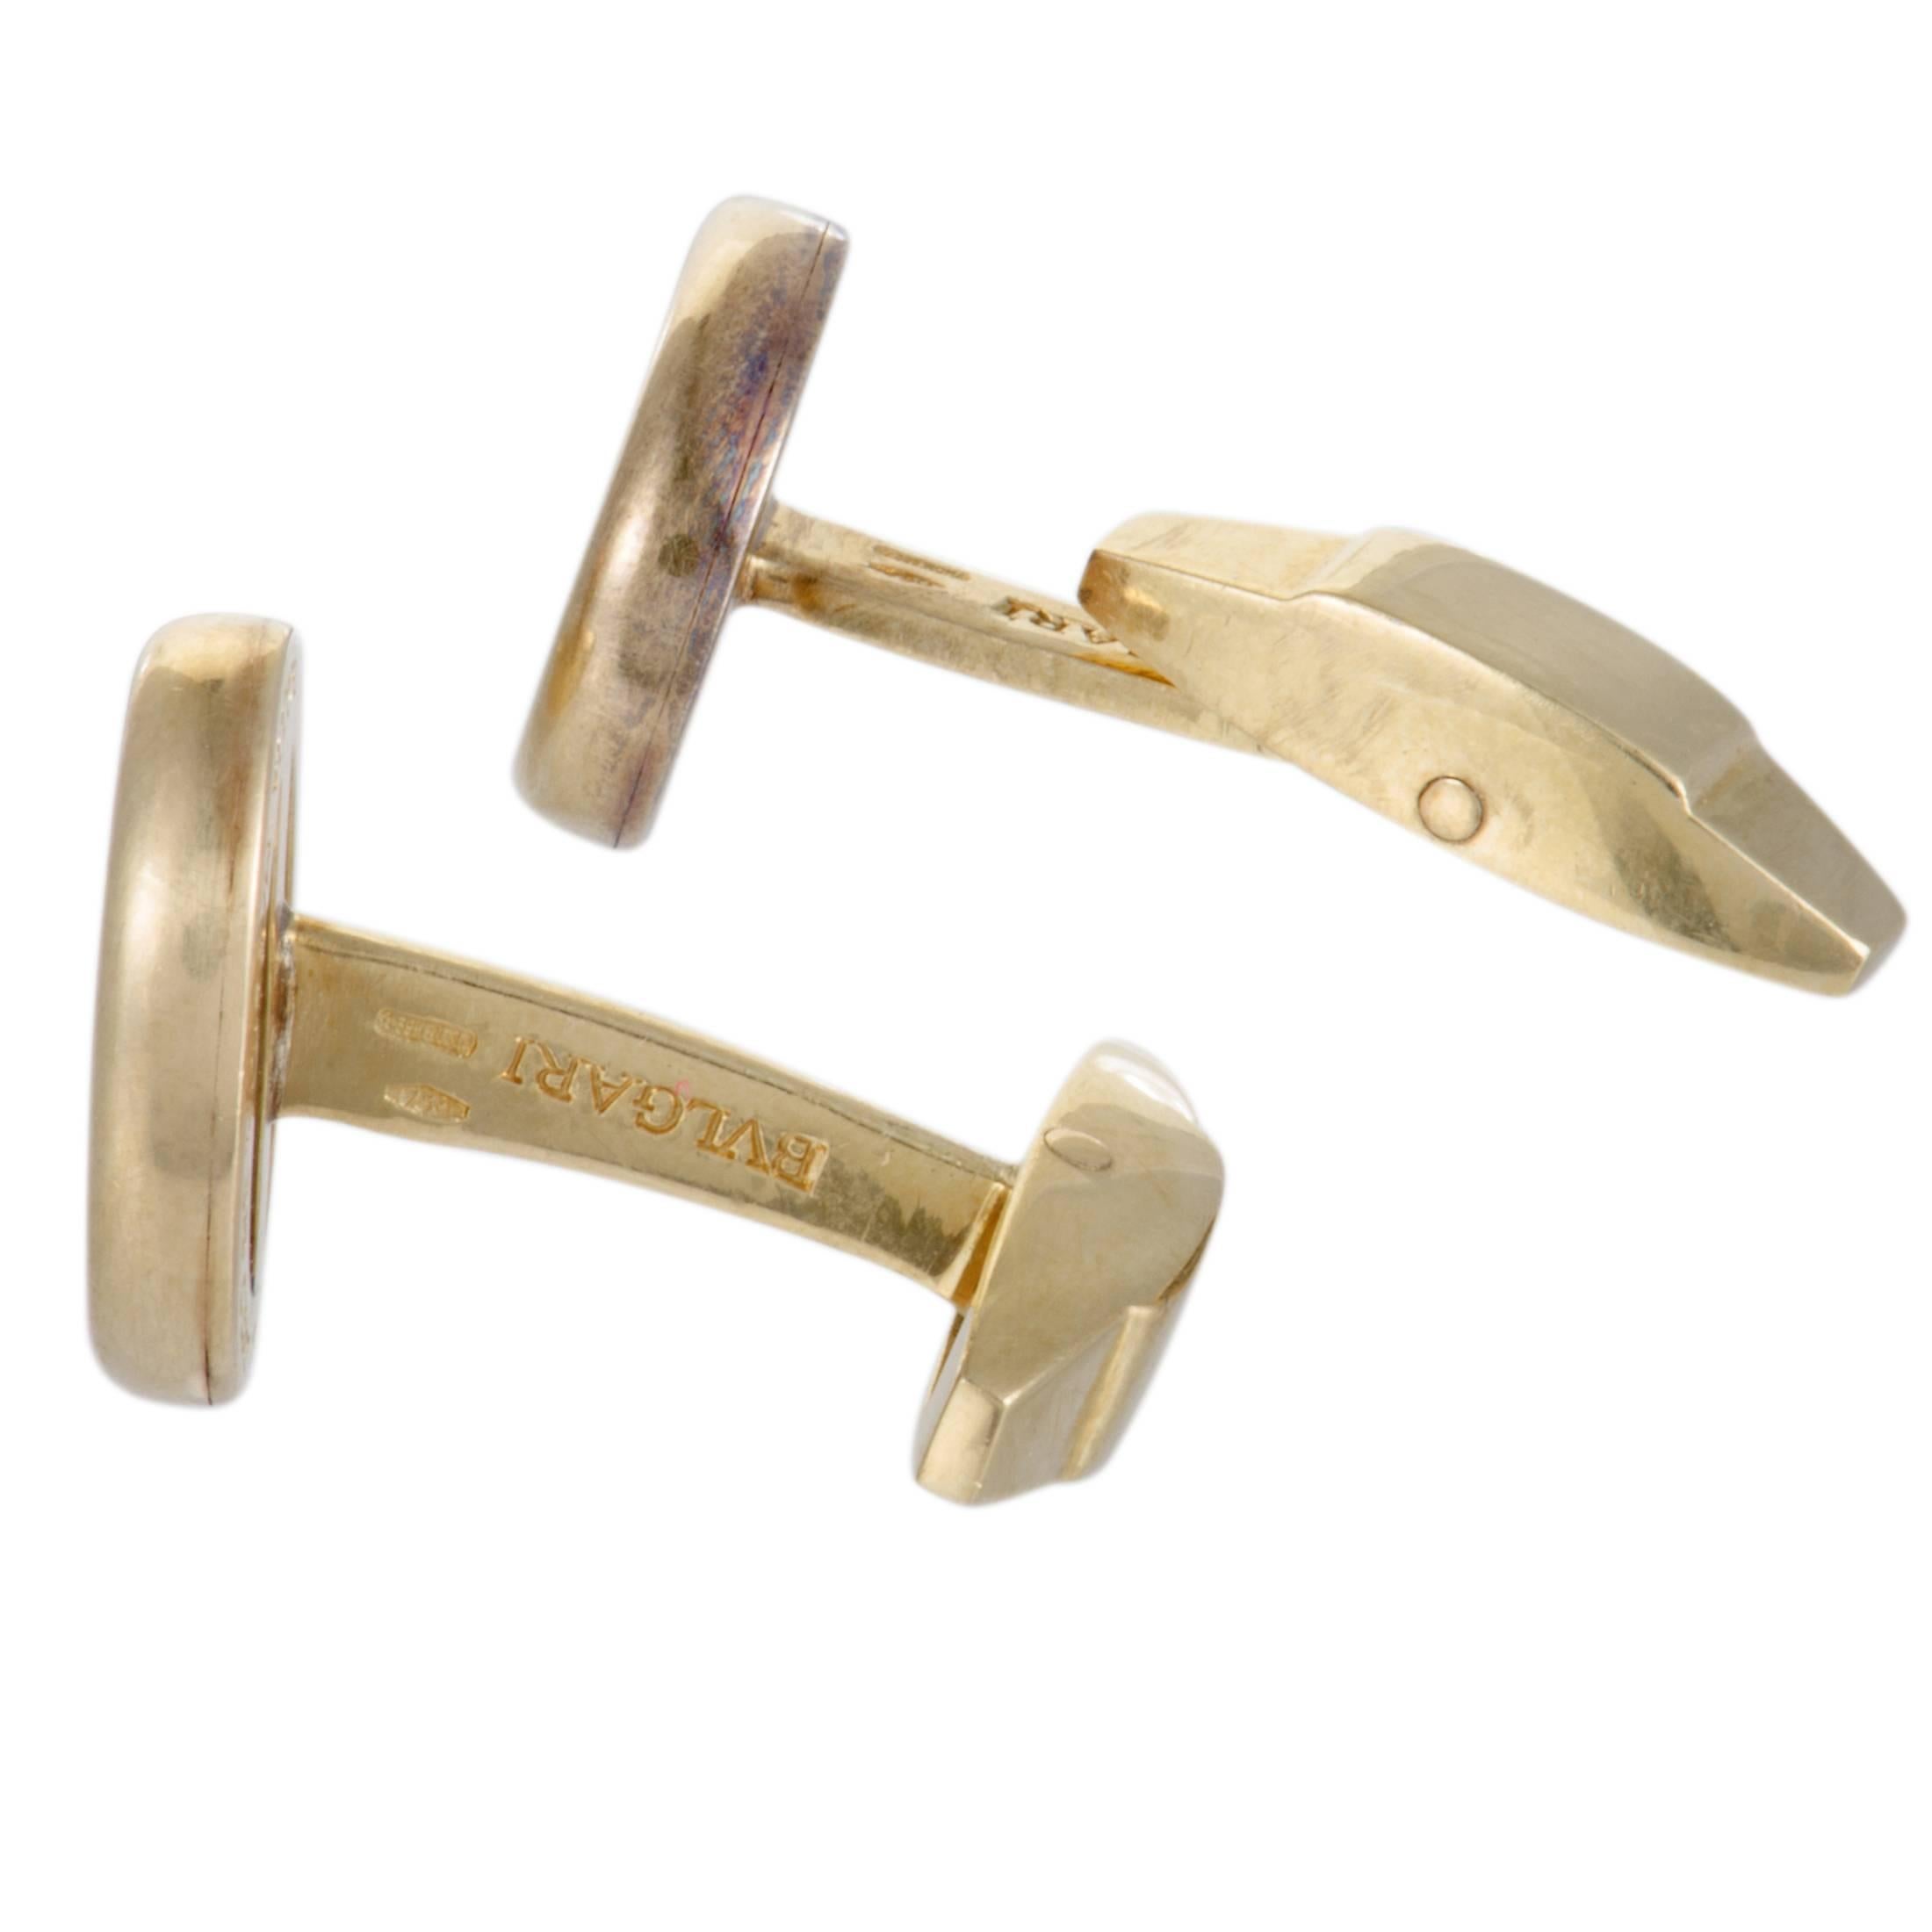 These stunning vintage cufflinks are a Bvlgari design and offer a captivatingly masculine appearance. The cufflinks are made of luxurious 18K yellow gold and each weighs 6.3 grams.
Dimension: .50